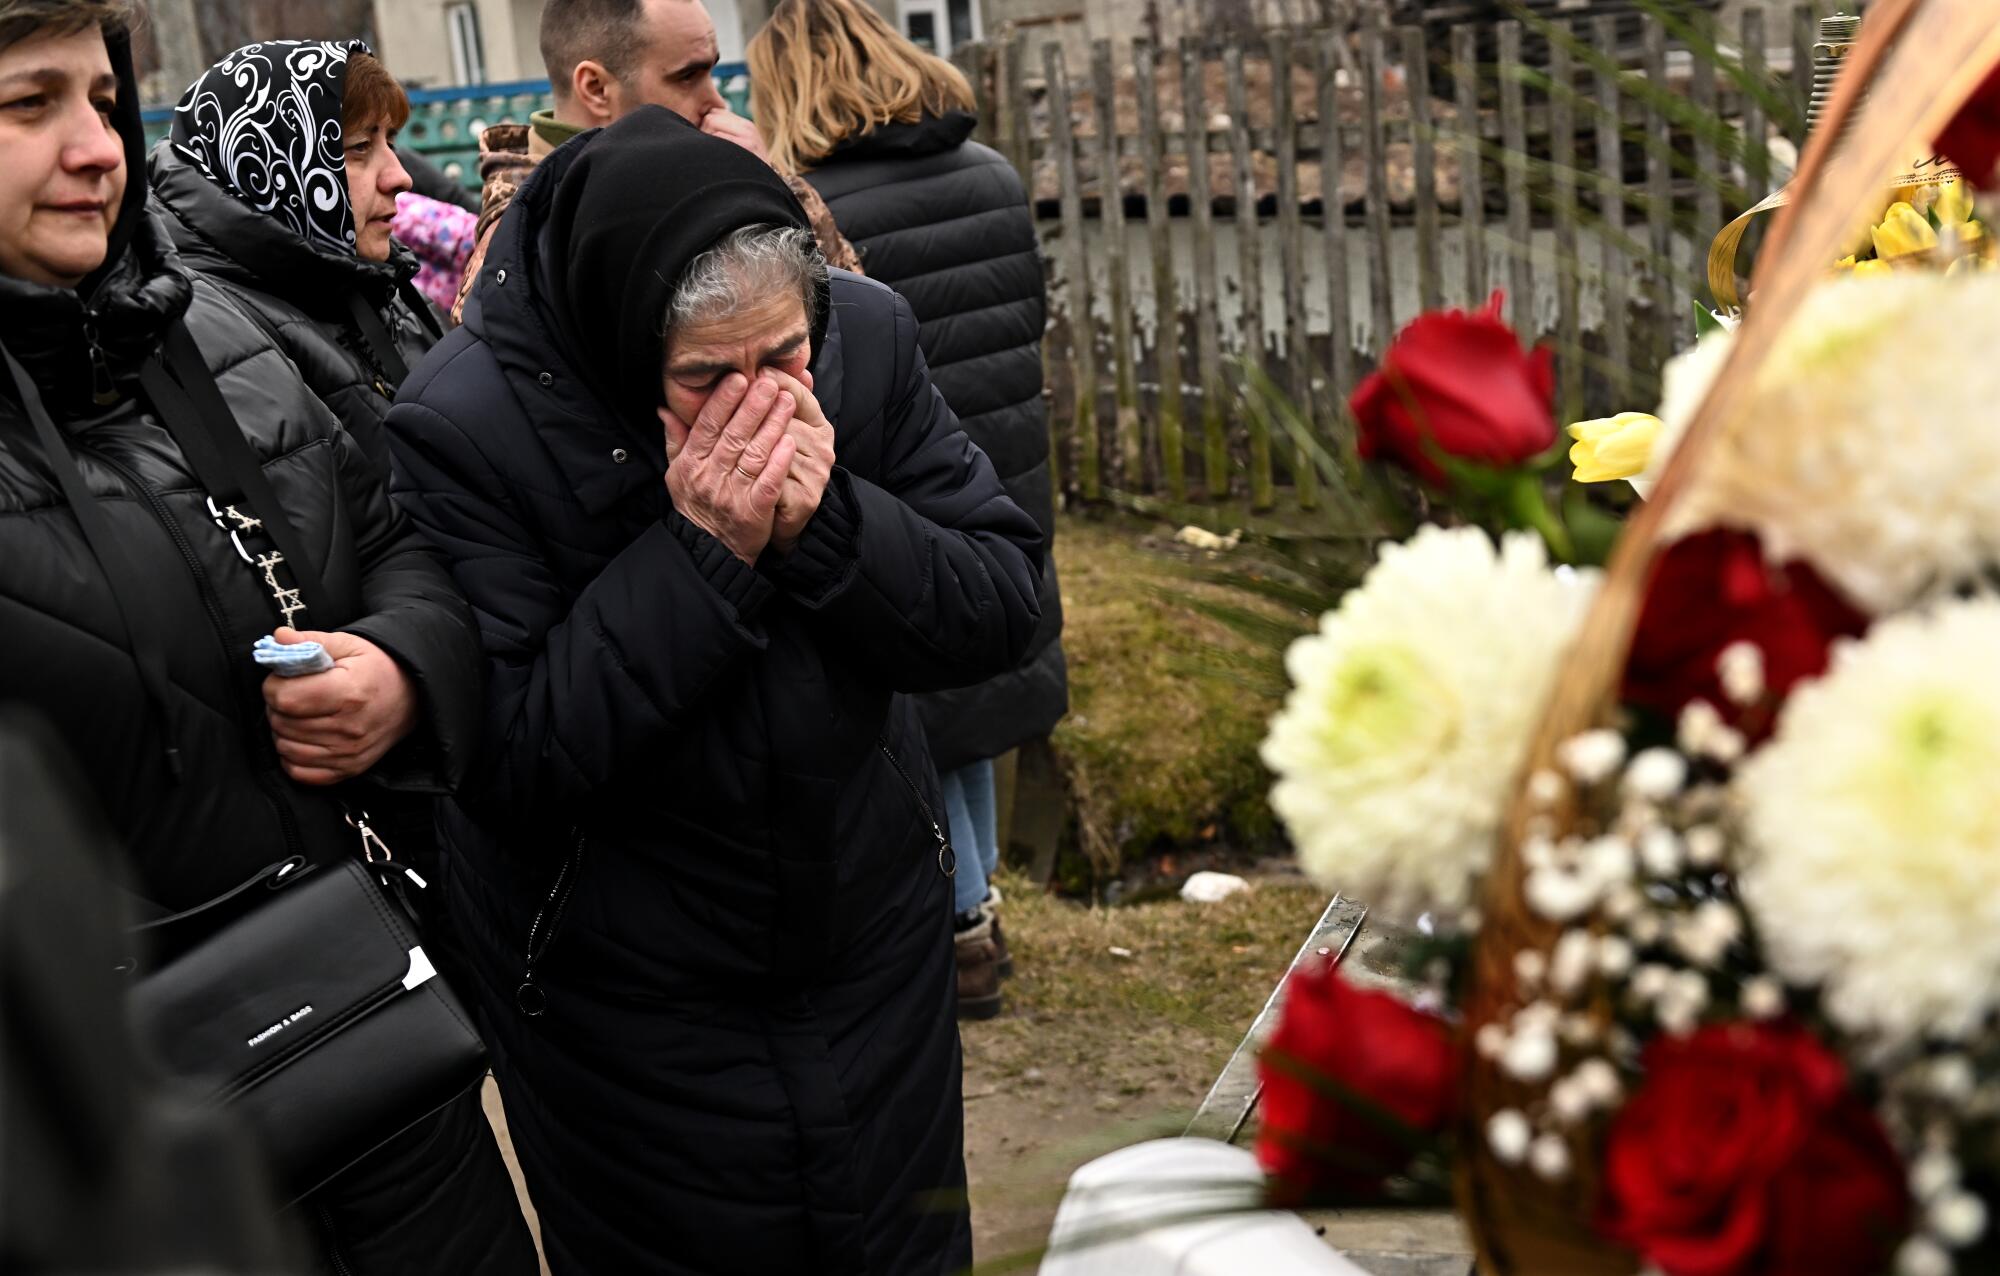 A woman cries in front of a funeral wreath.